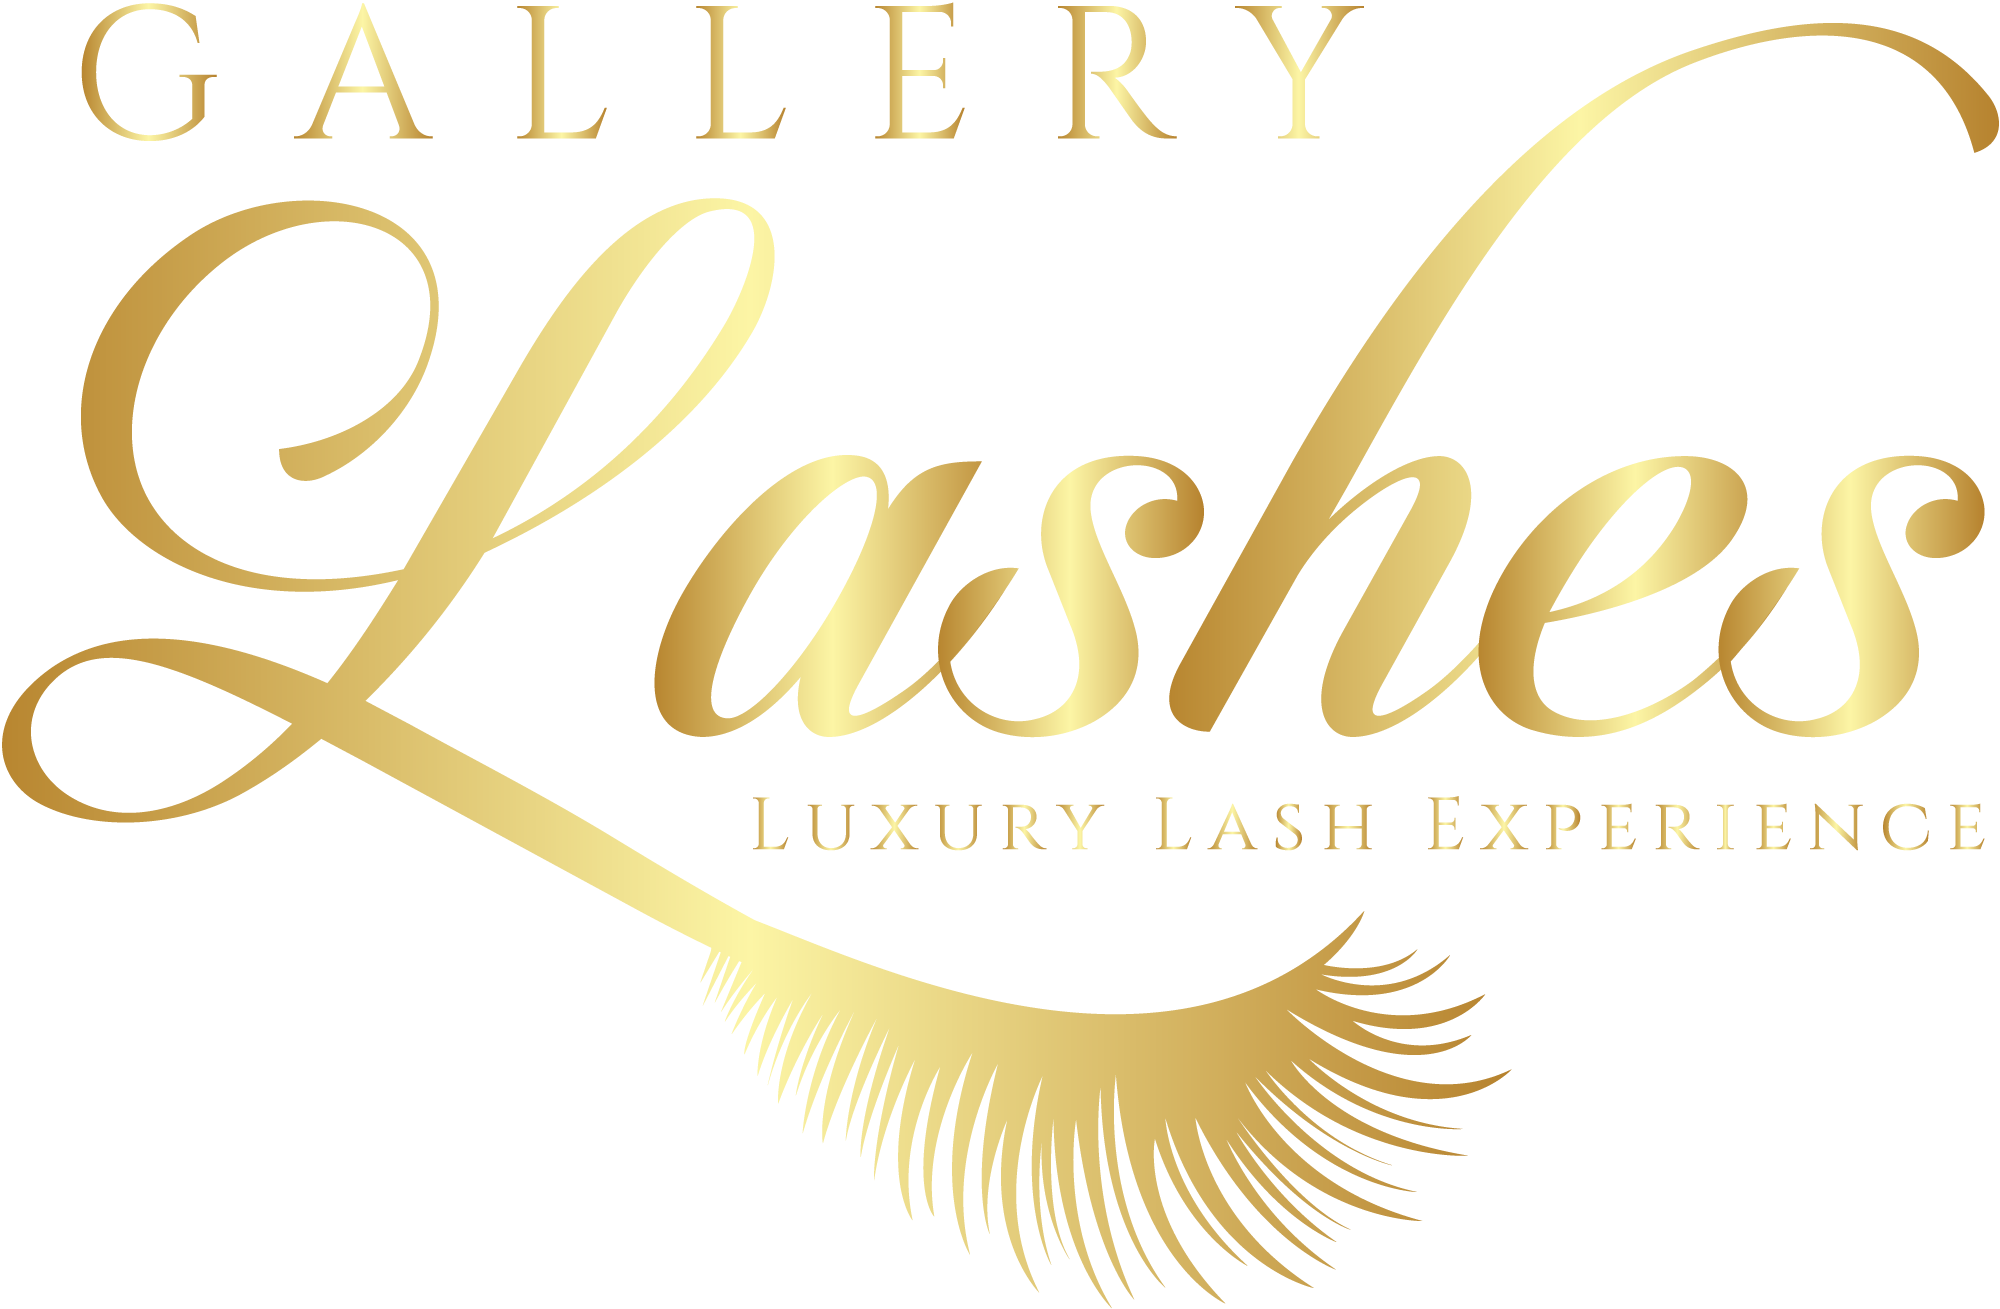 Gallery Lashes